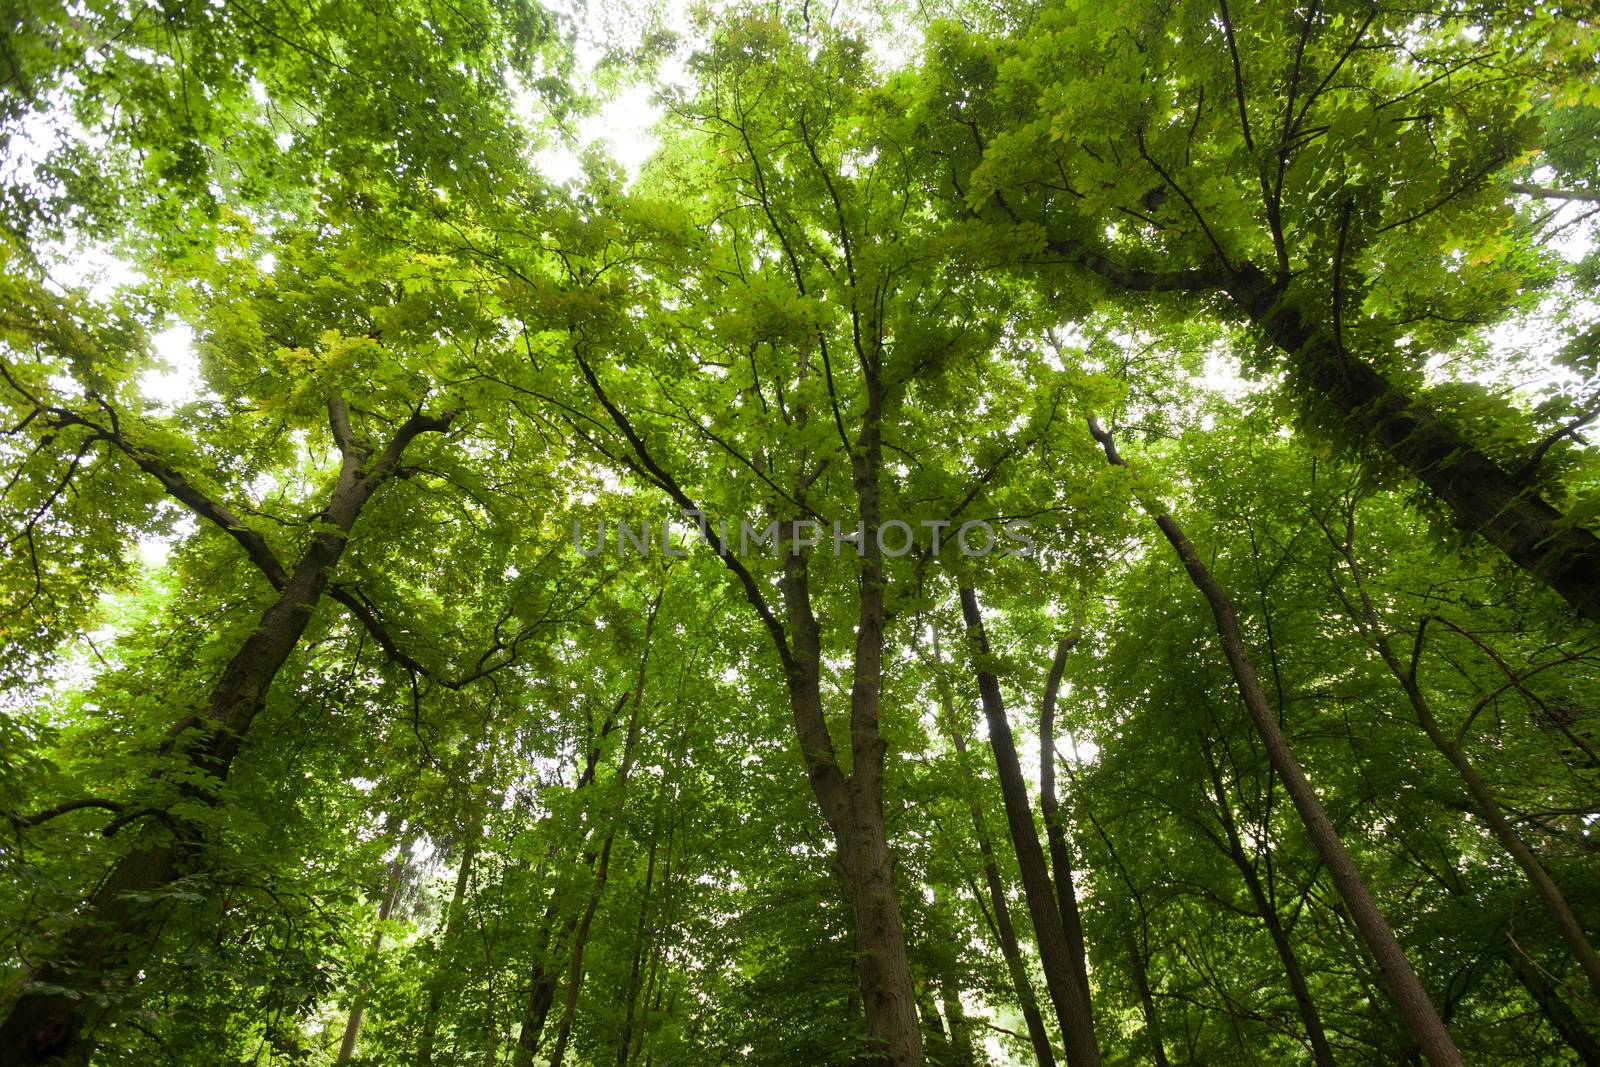 View of trees in forest looking up, wide angle